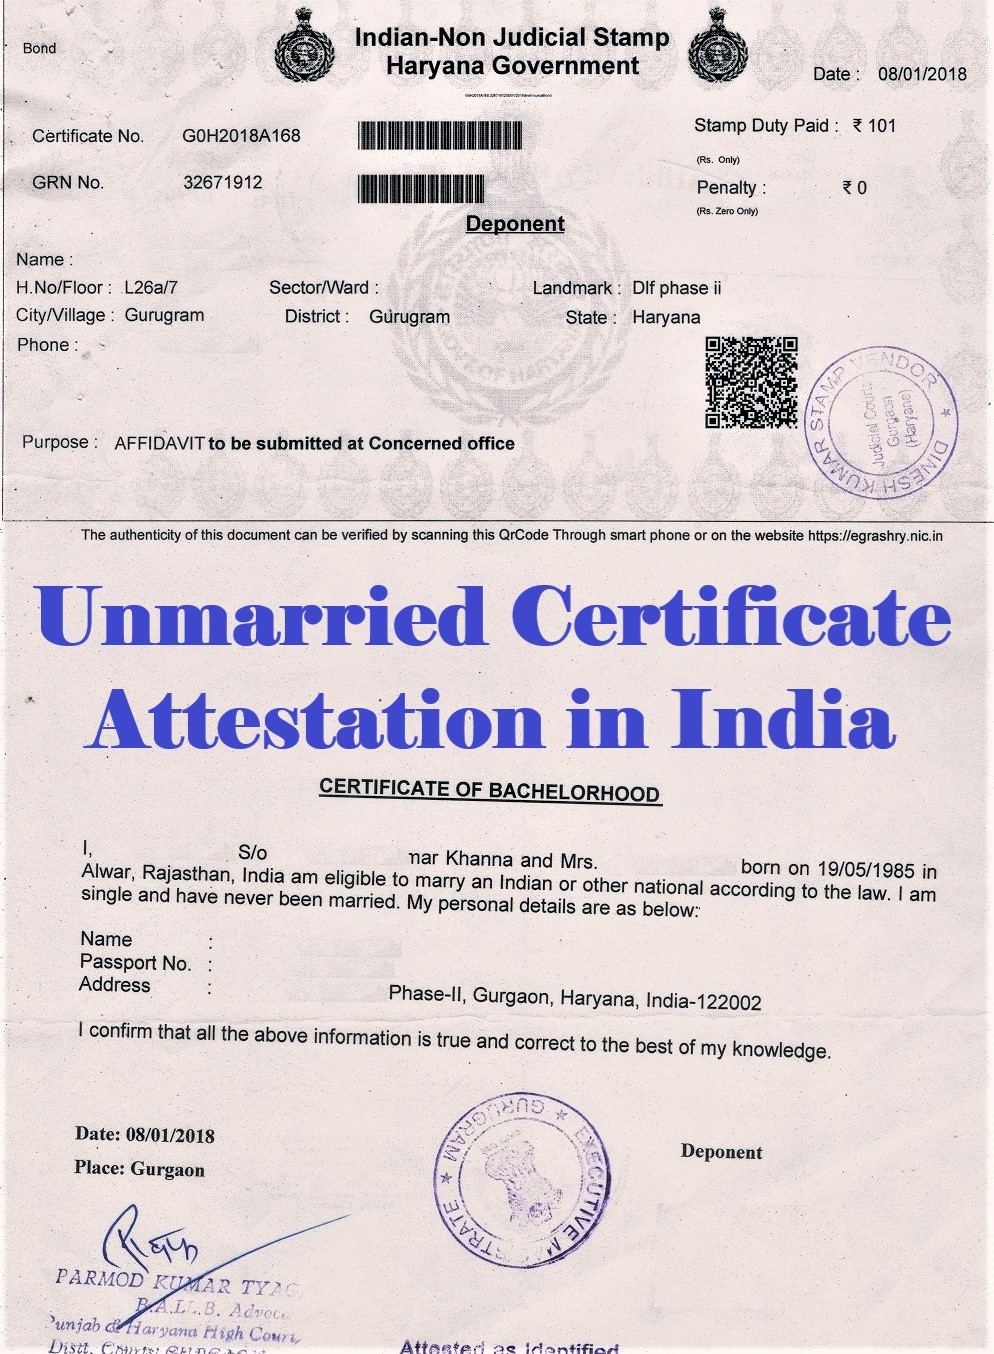 Unmarried Certificate Attestation from Senegal Embassy